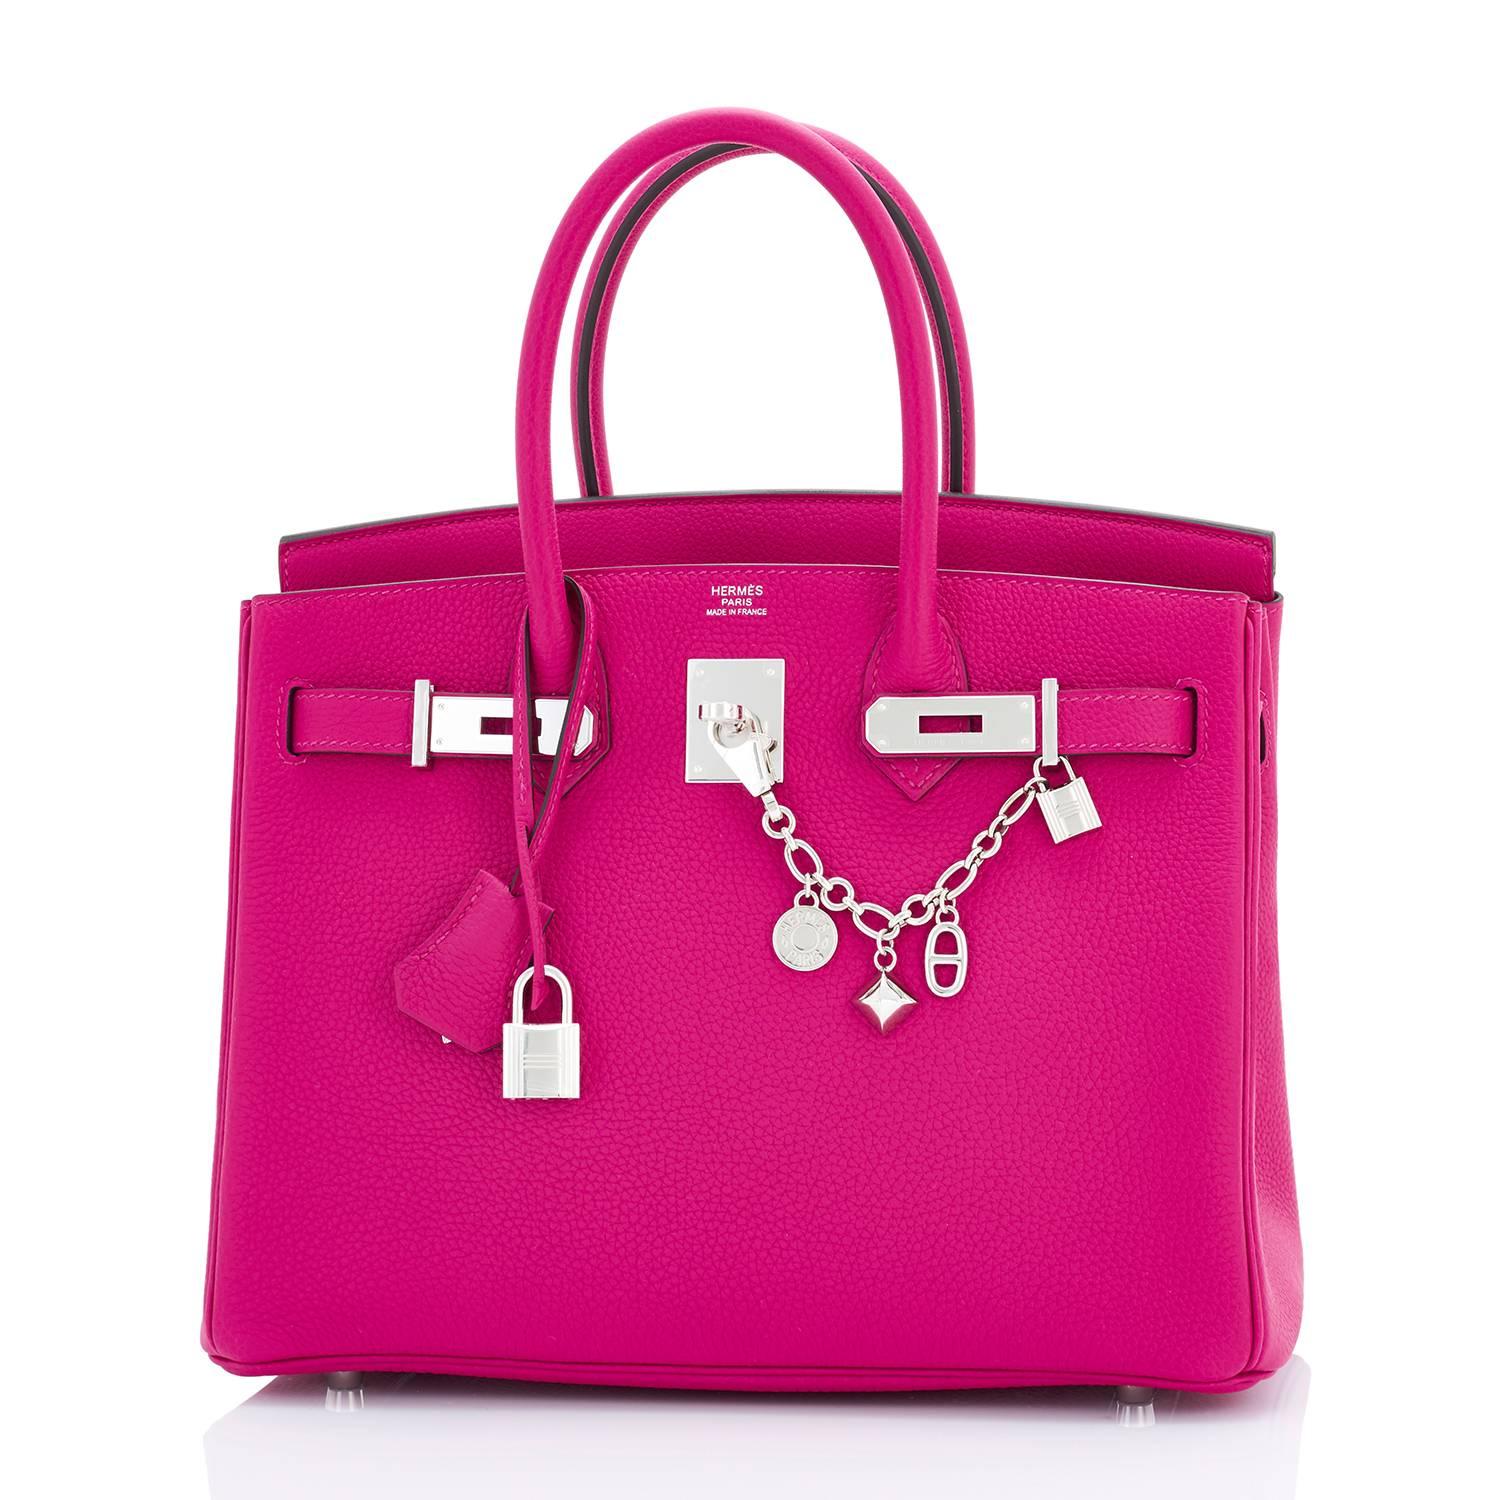 Hermes Rose Pourpre 30cm Birkin Pink Togo Palladium Hardware
Brand New in Box. Store fresh. Pristine condition (with plastic on hardware).
Just purchased from store; bag bears new interior A stamp.
Perfect gift! Coming full set with keys, lock,